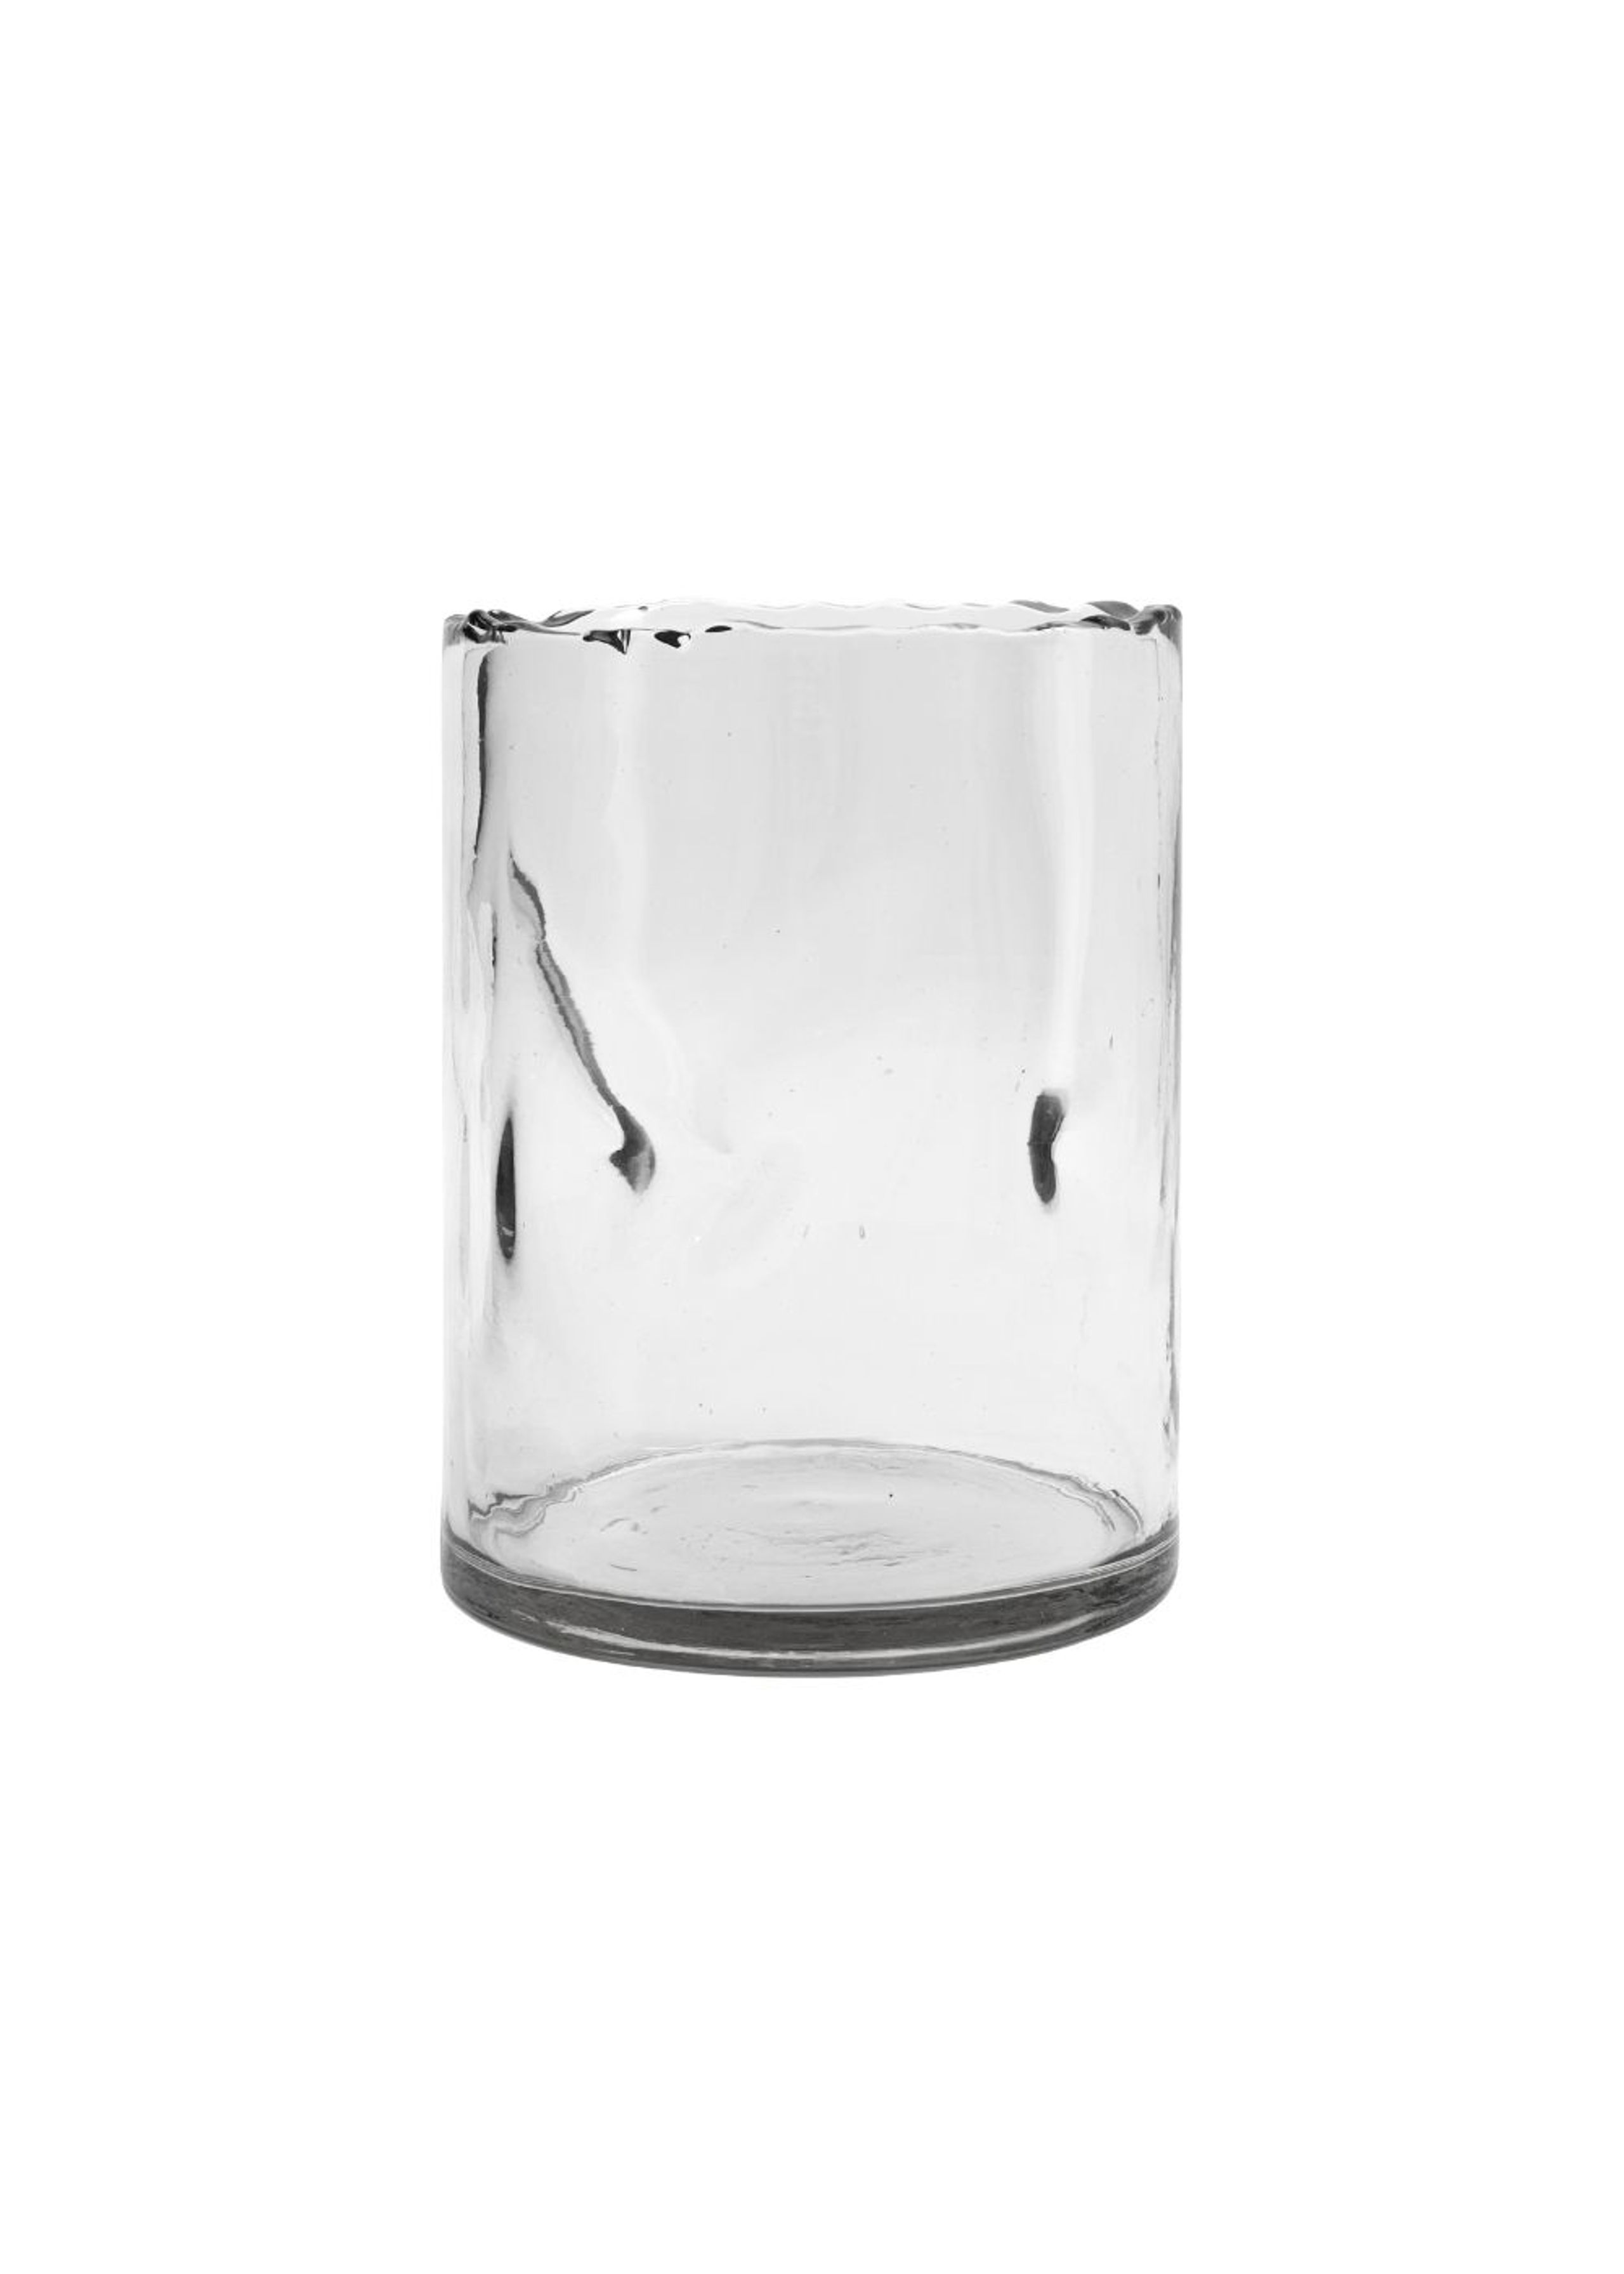 House doctor - Vaso - Vase - Clear - Clear - Small